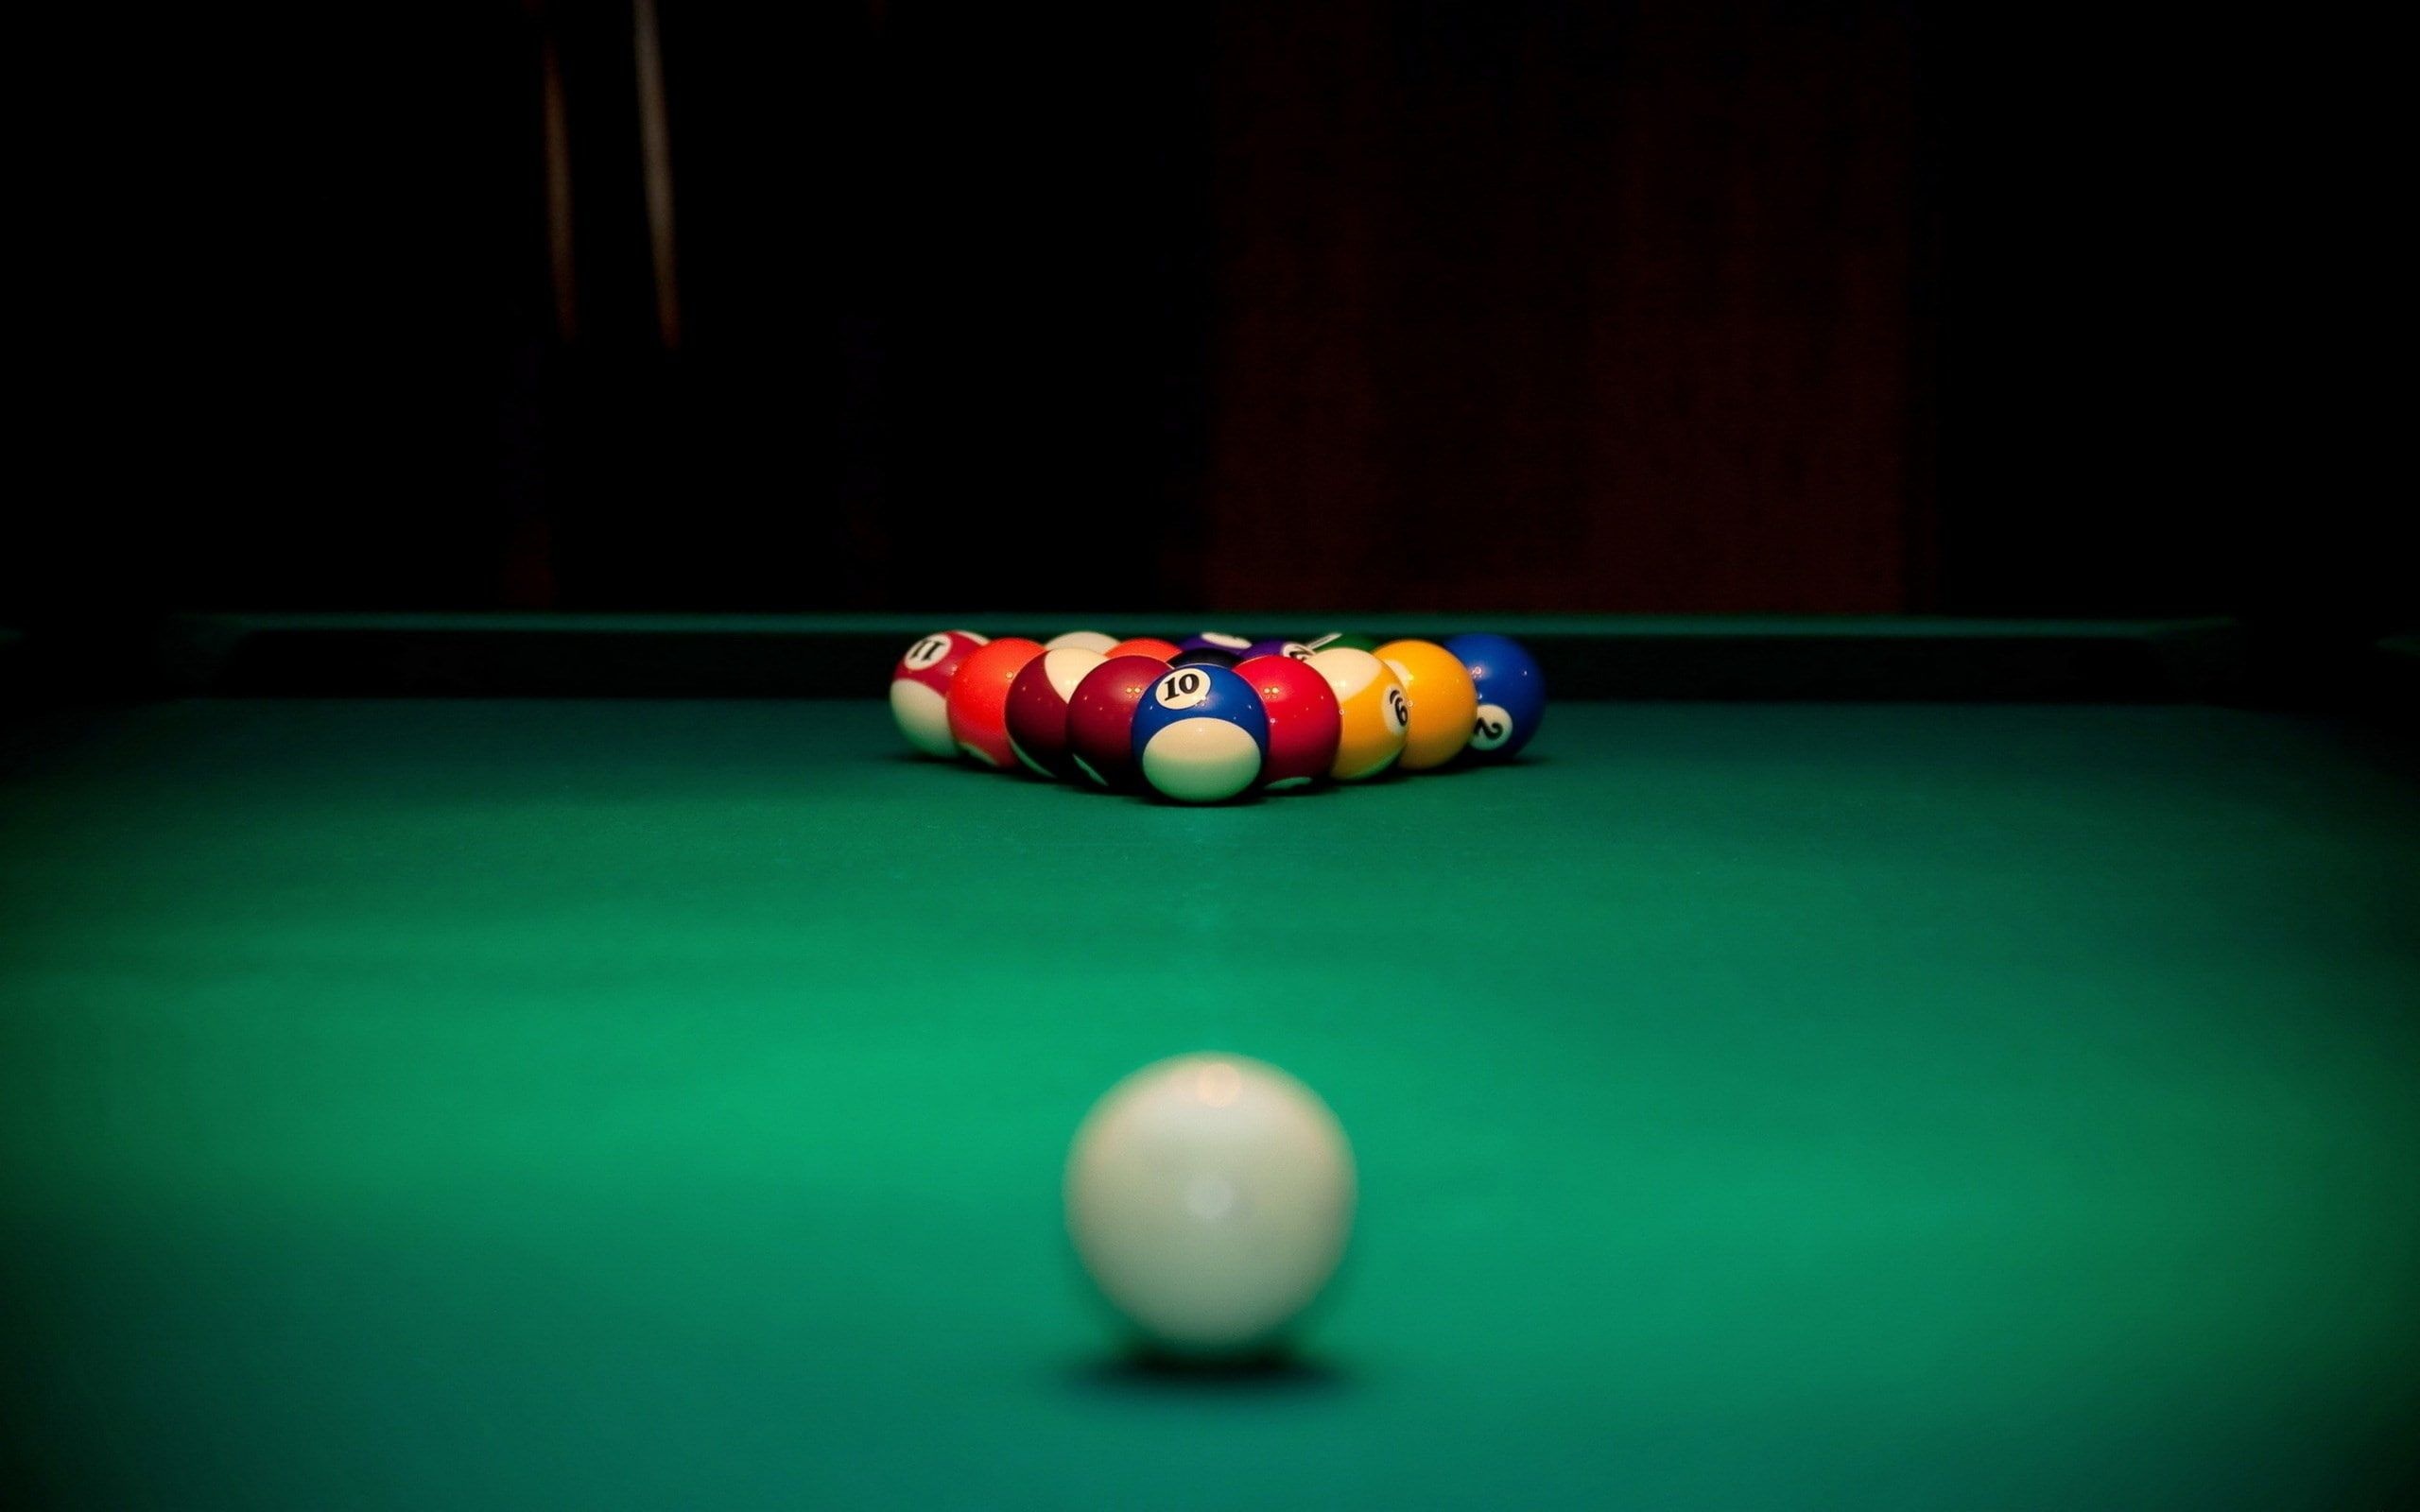 Cue Sports: A white cue ball before the break shot in a classic eightball type of a recreational sport. 2560x1600 HD Wallpaper.